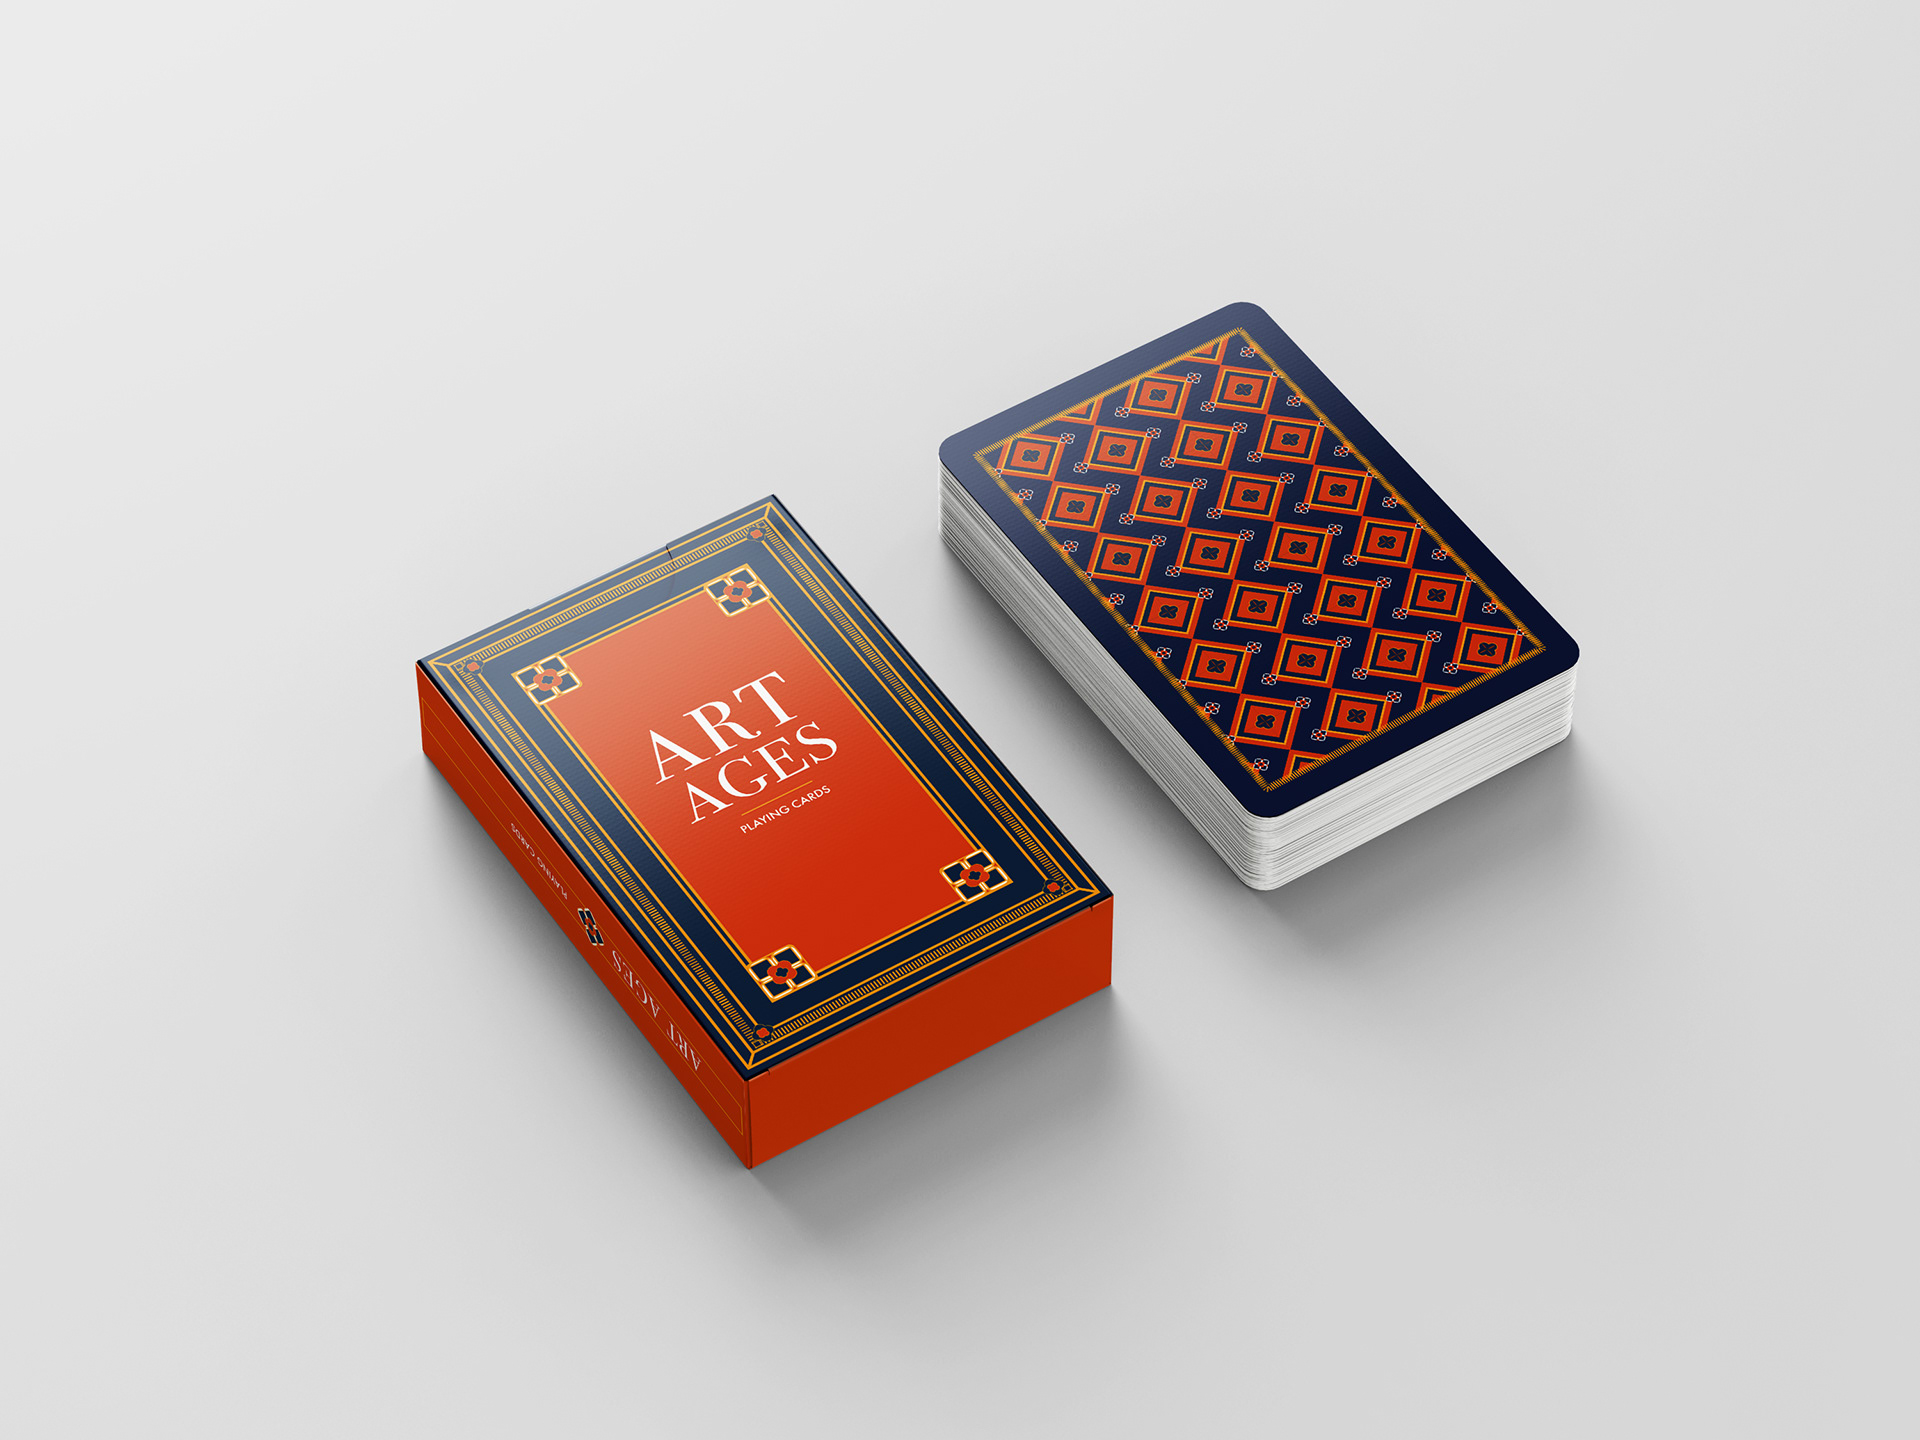 Design History: The Art of Playing Cards